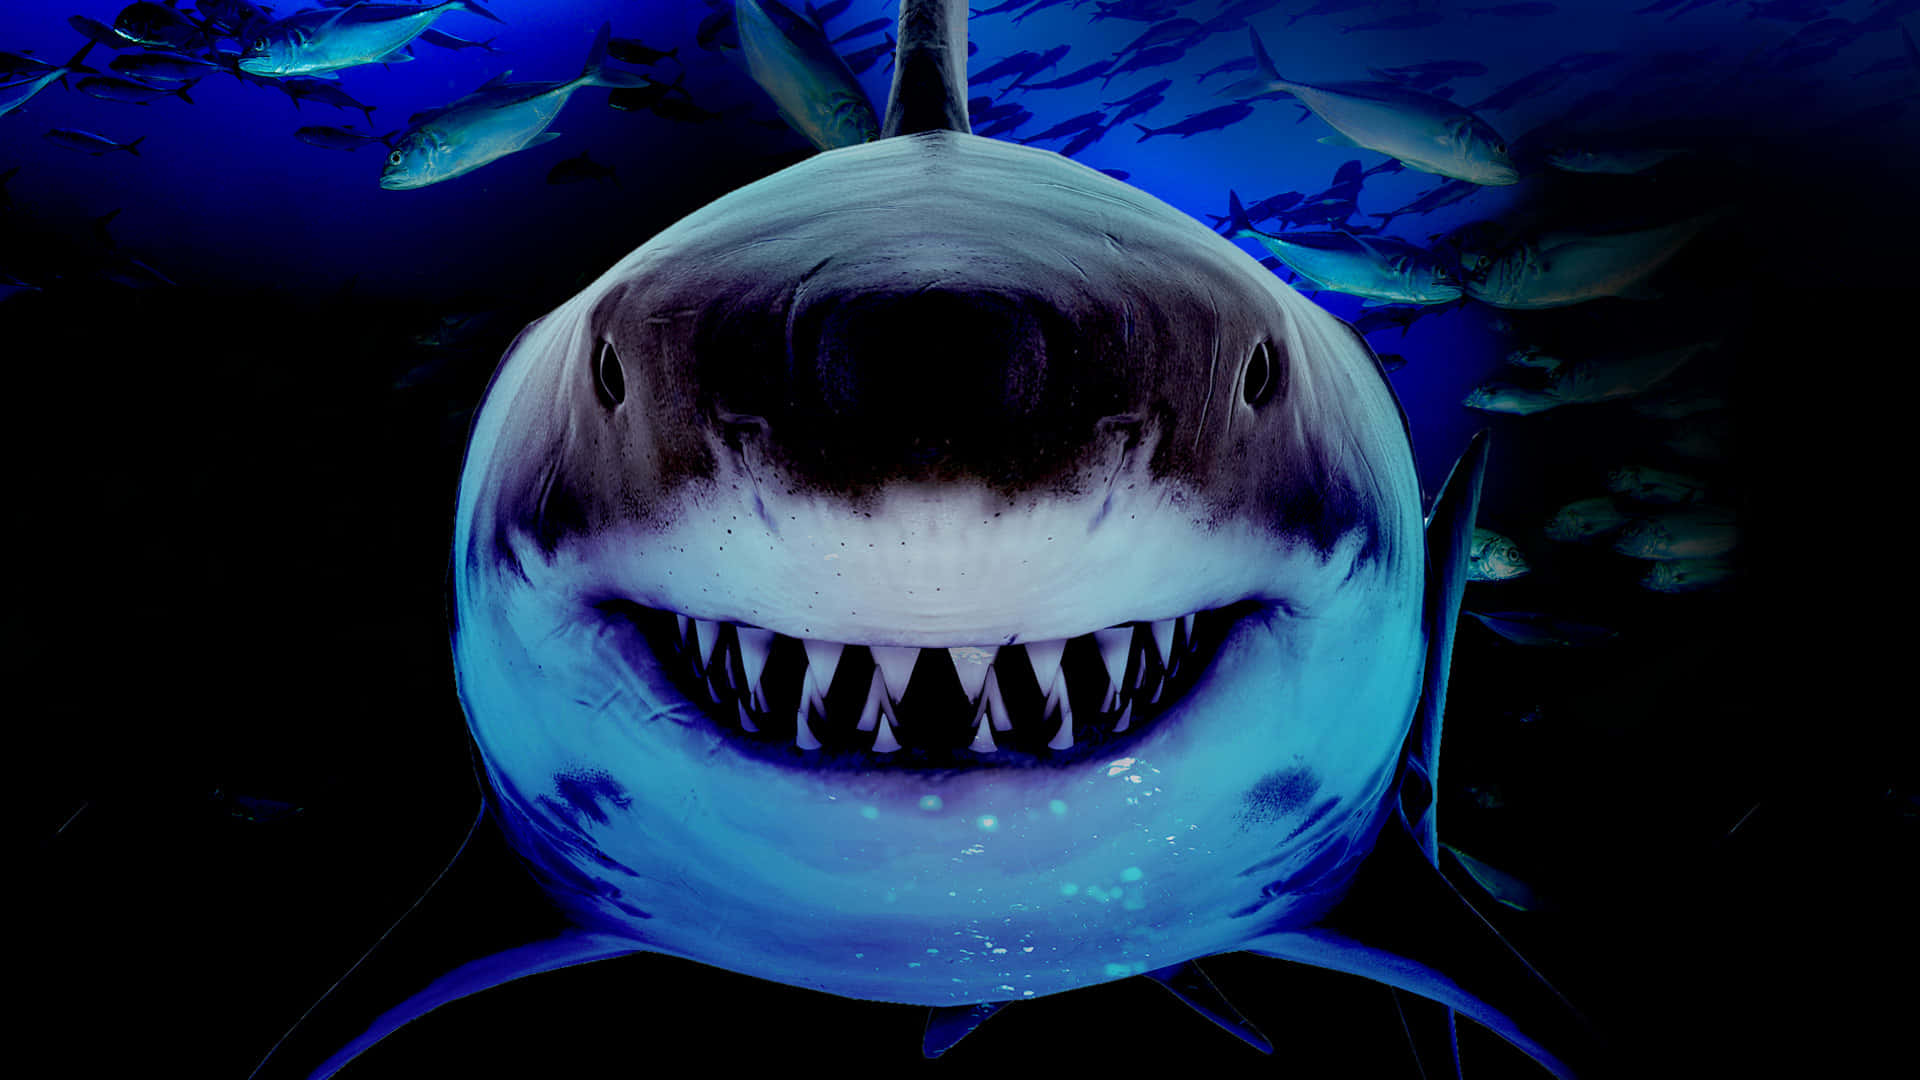 Take a Bite Out of Fear with this Scary Shark Image Wallpaper